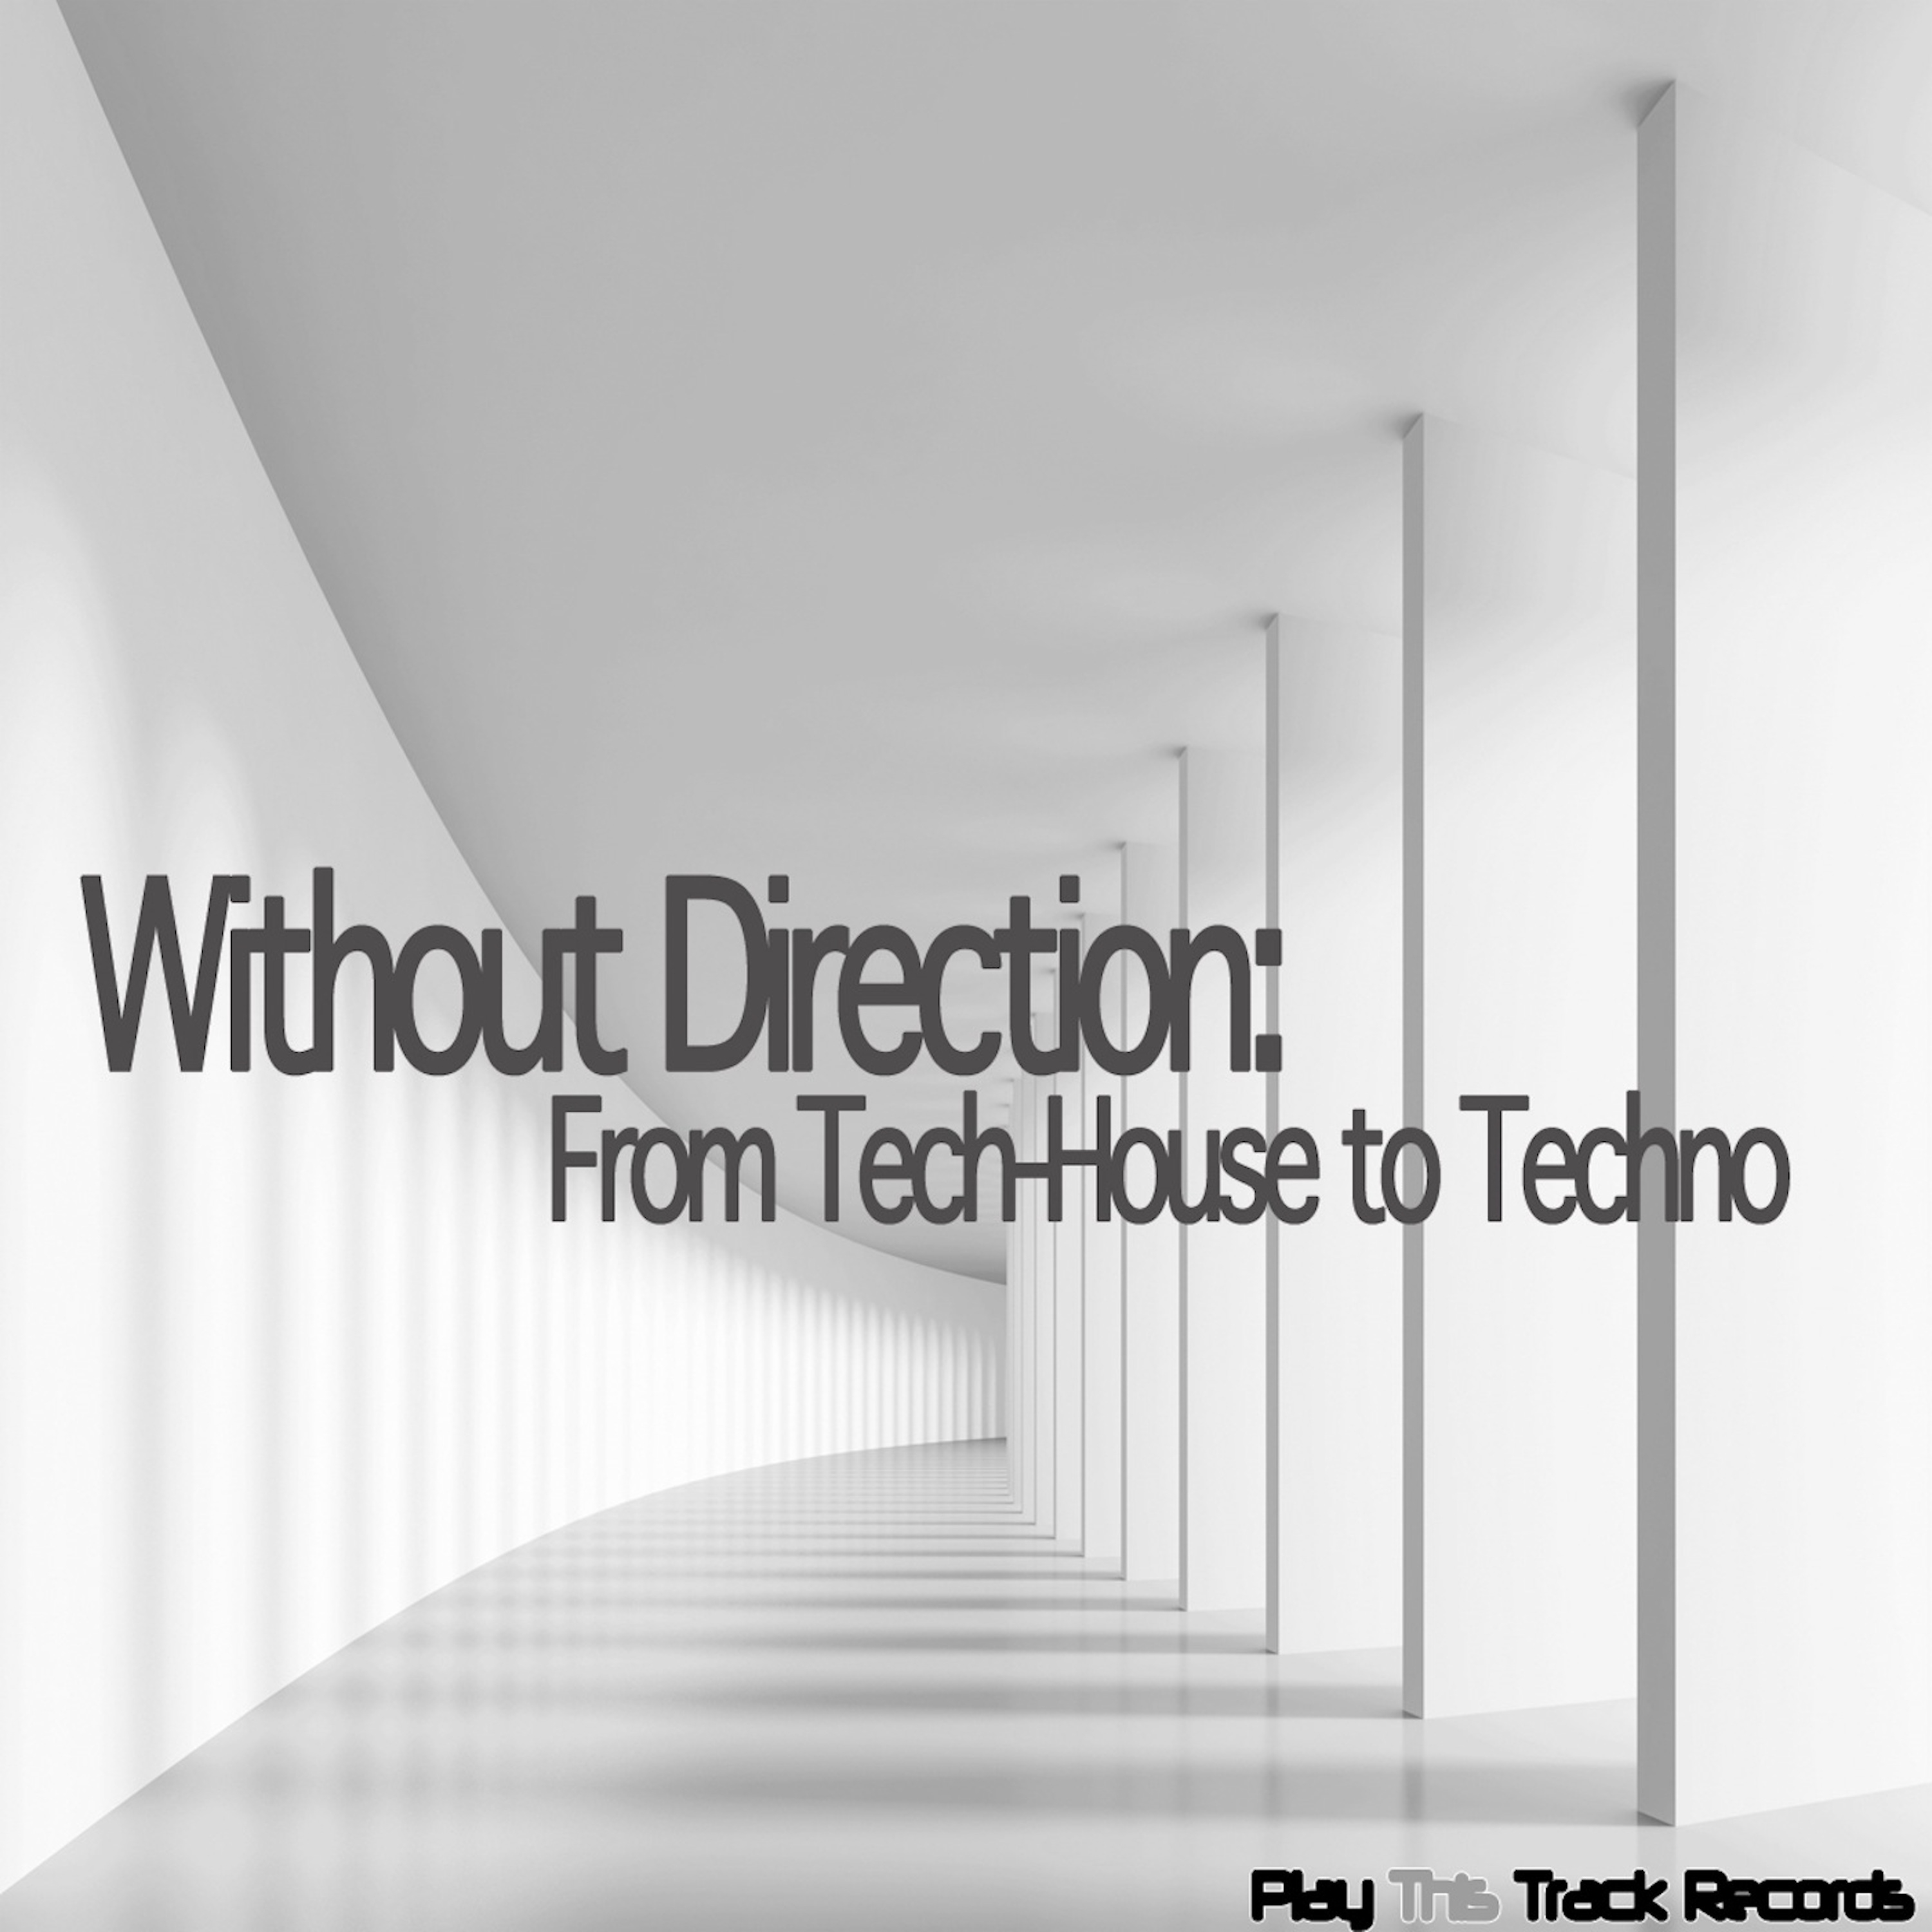 Without Direction: From Tech-House to Techno